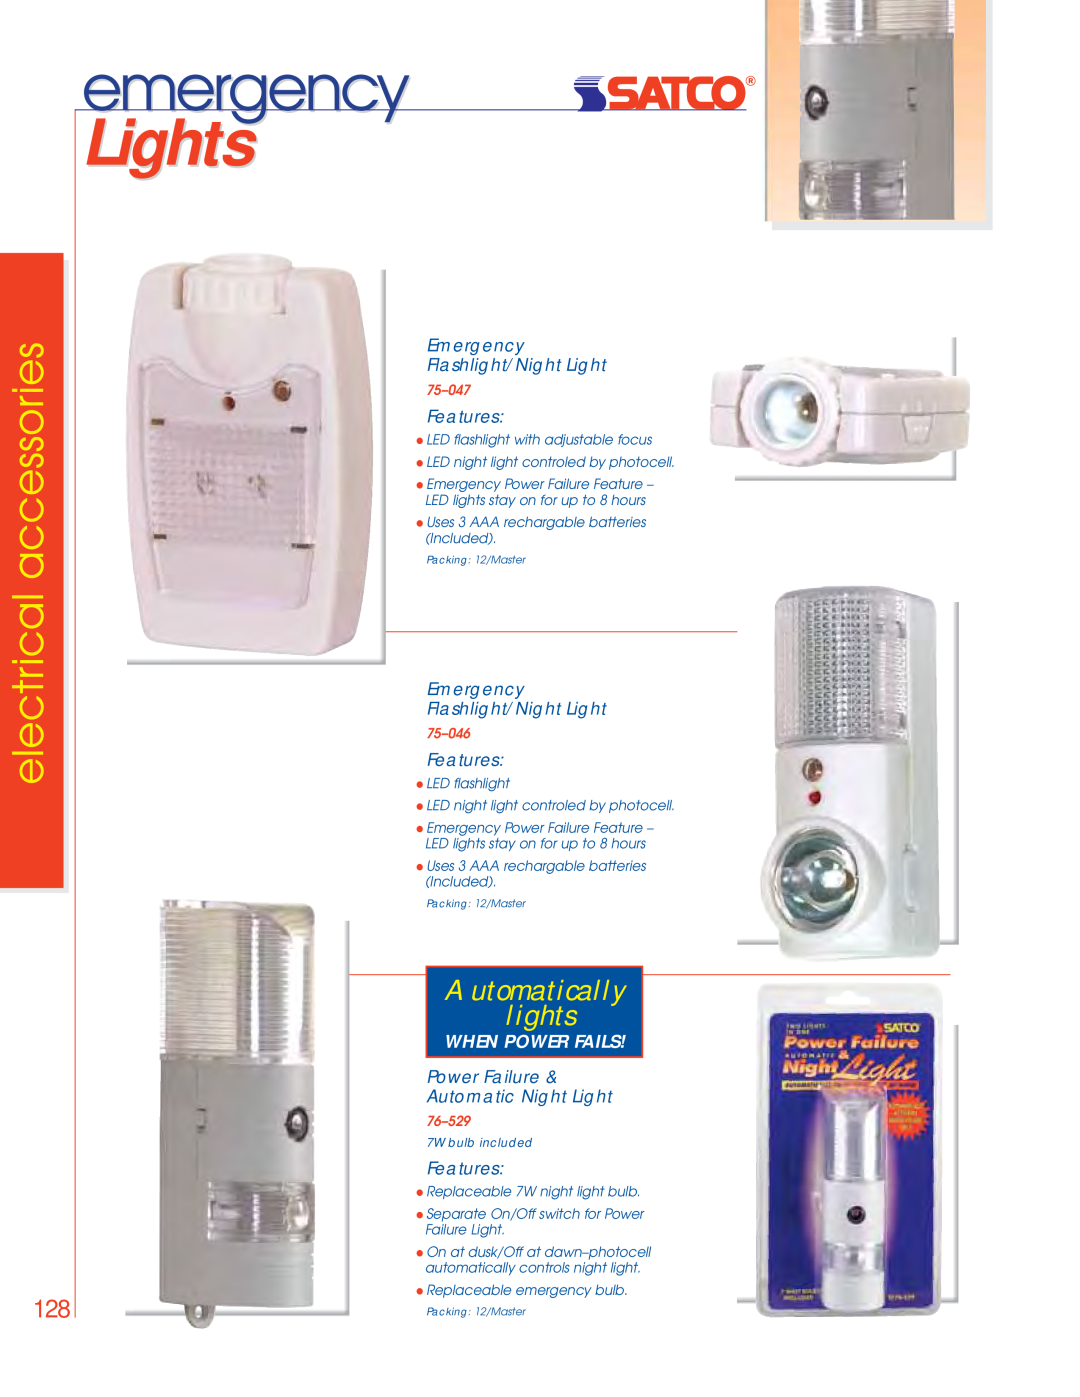 Satco Products 75-046, 76-529 manual Lights, electrical accessories, Emergency Flashlight/Night Light, Features, emergency 